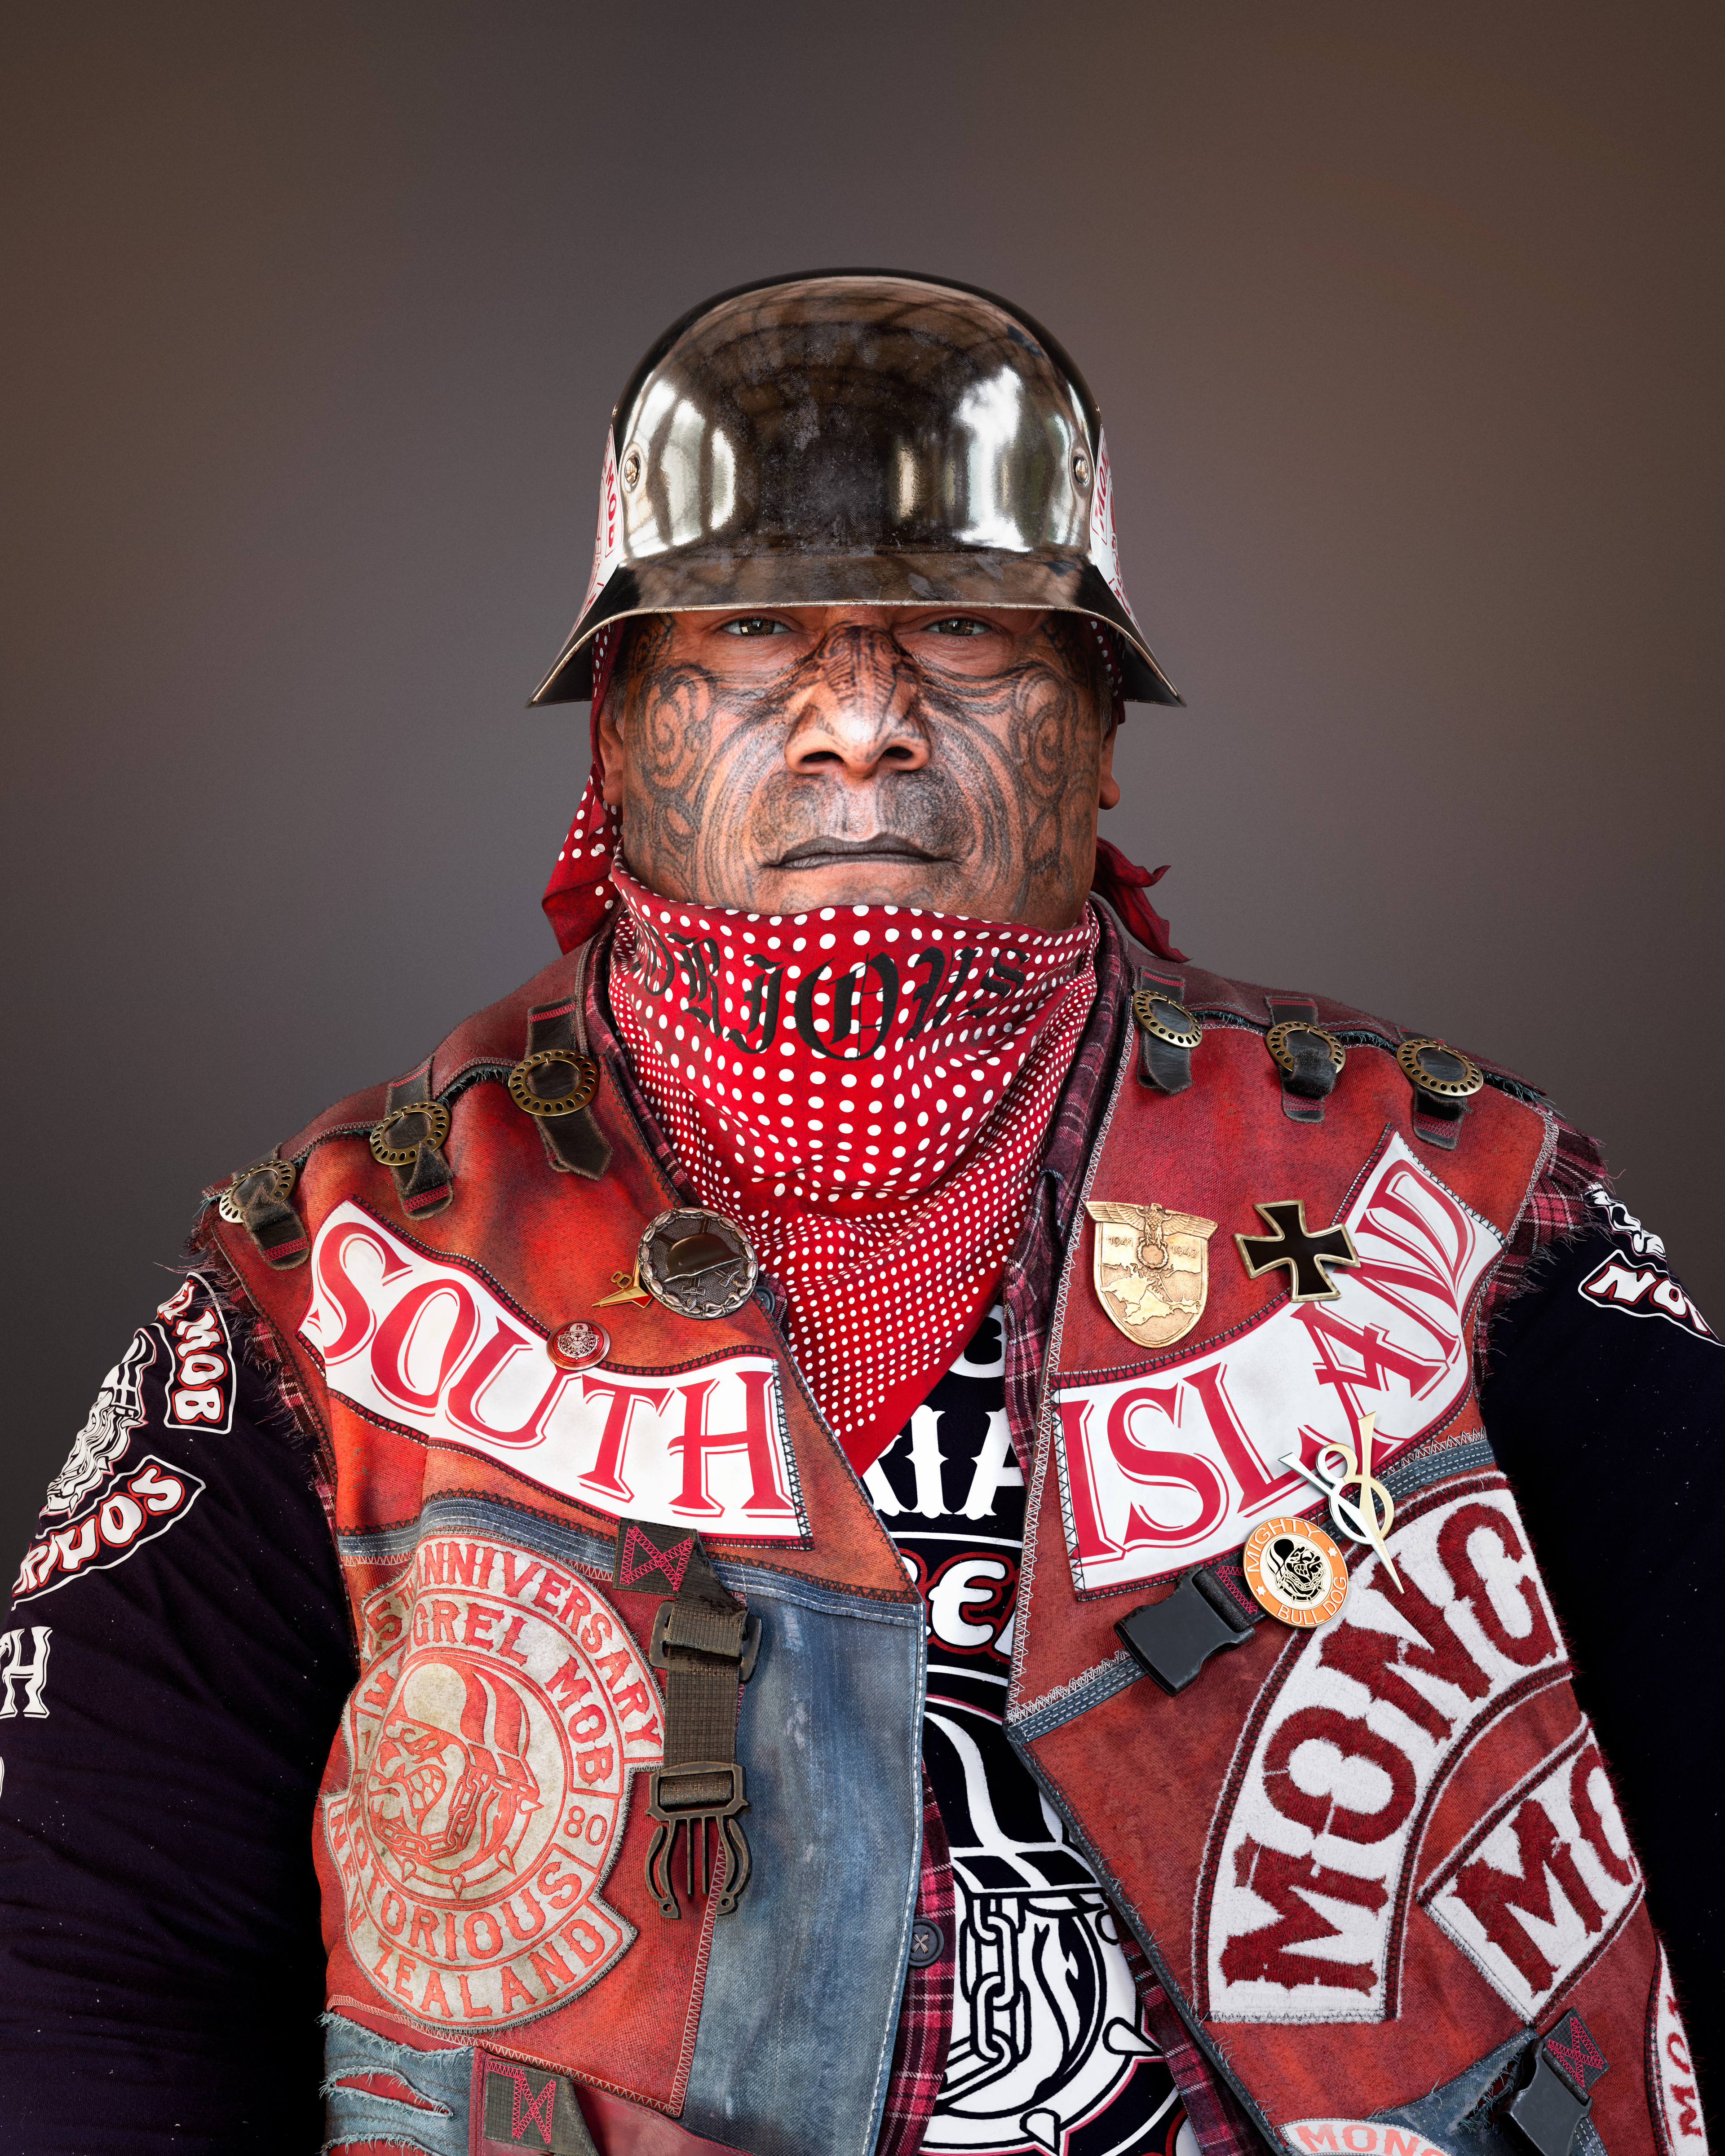 Mighty Mongrel Mob